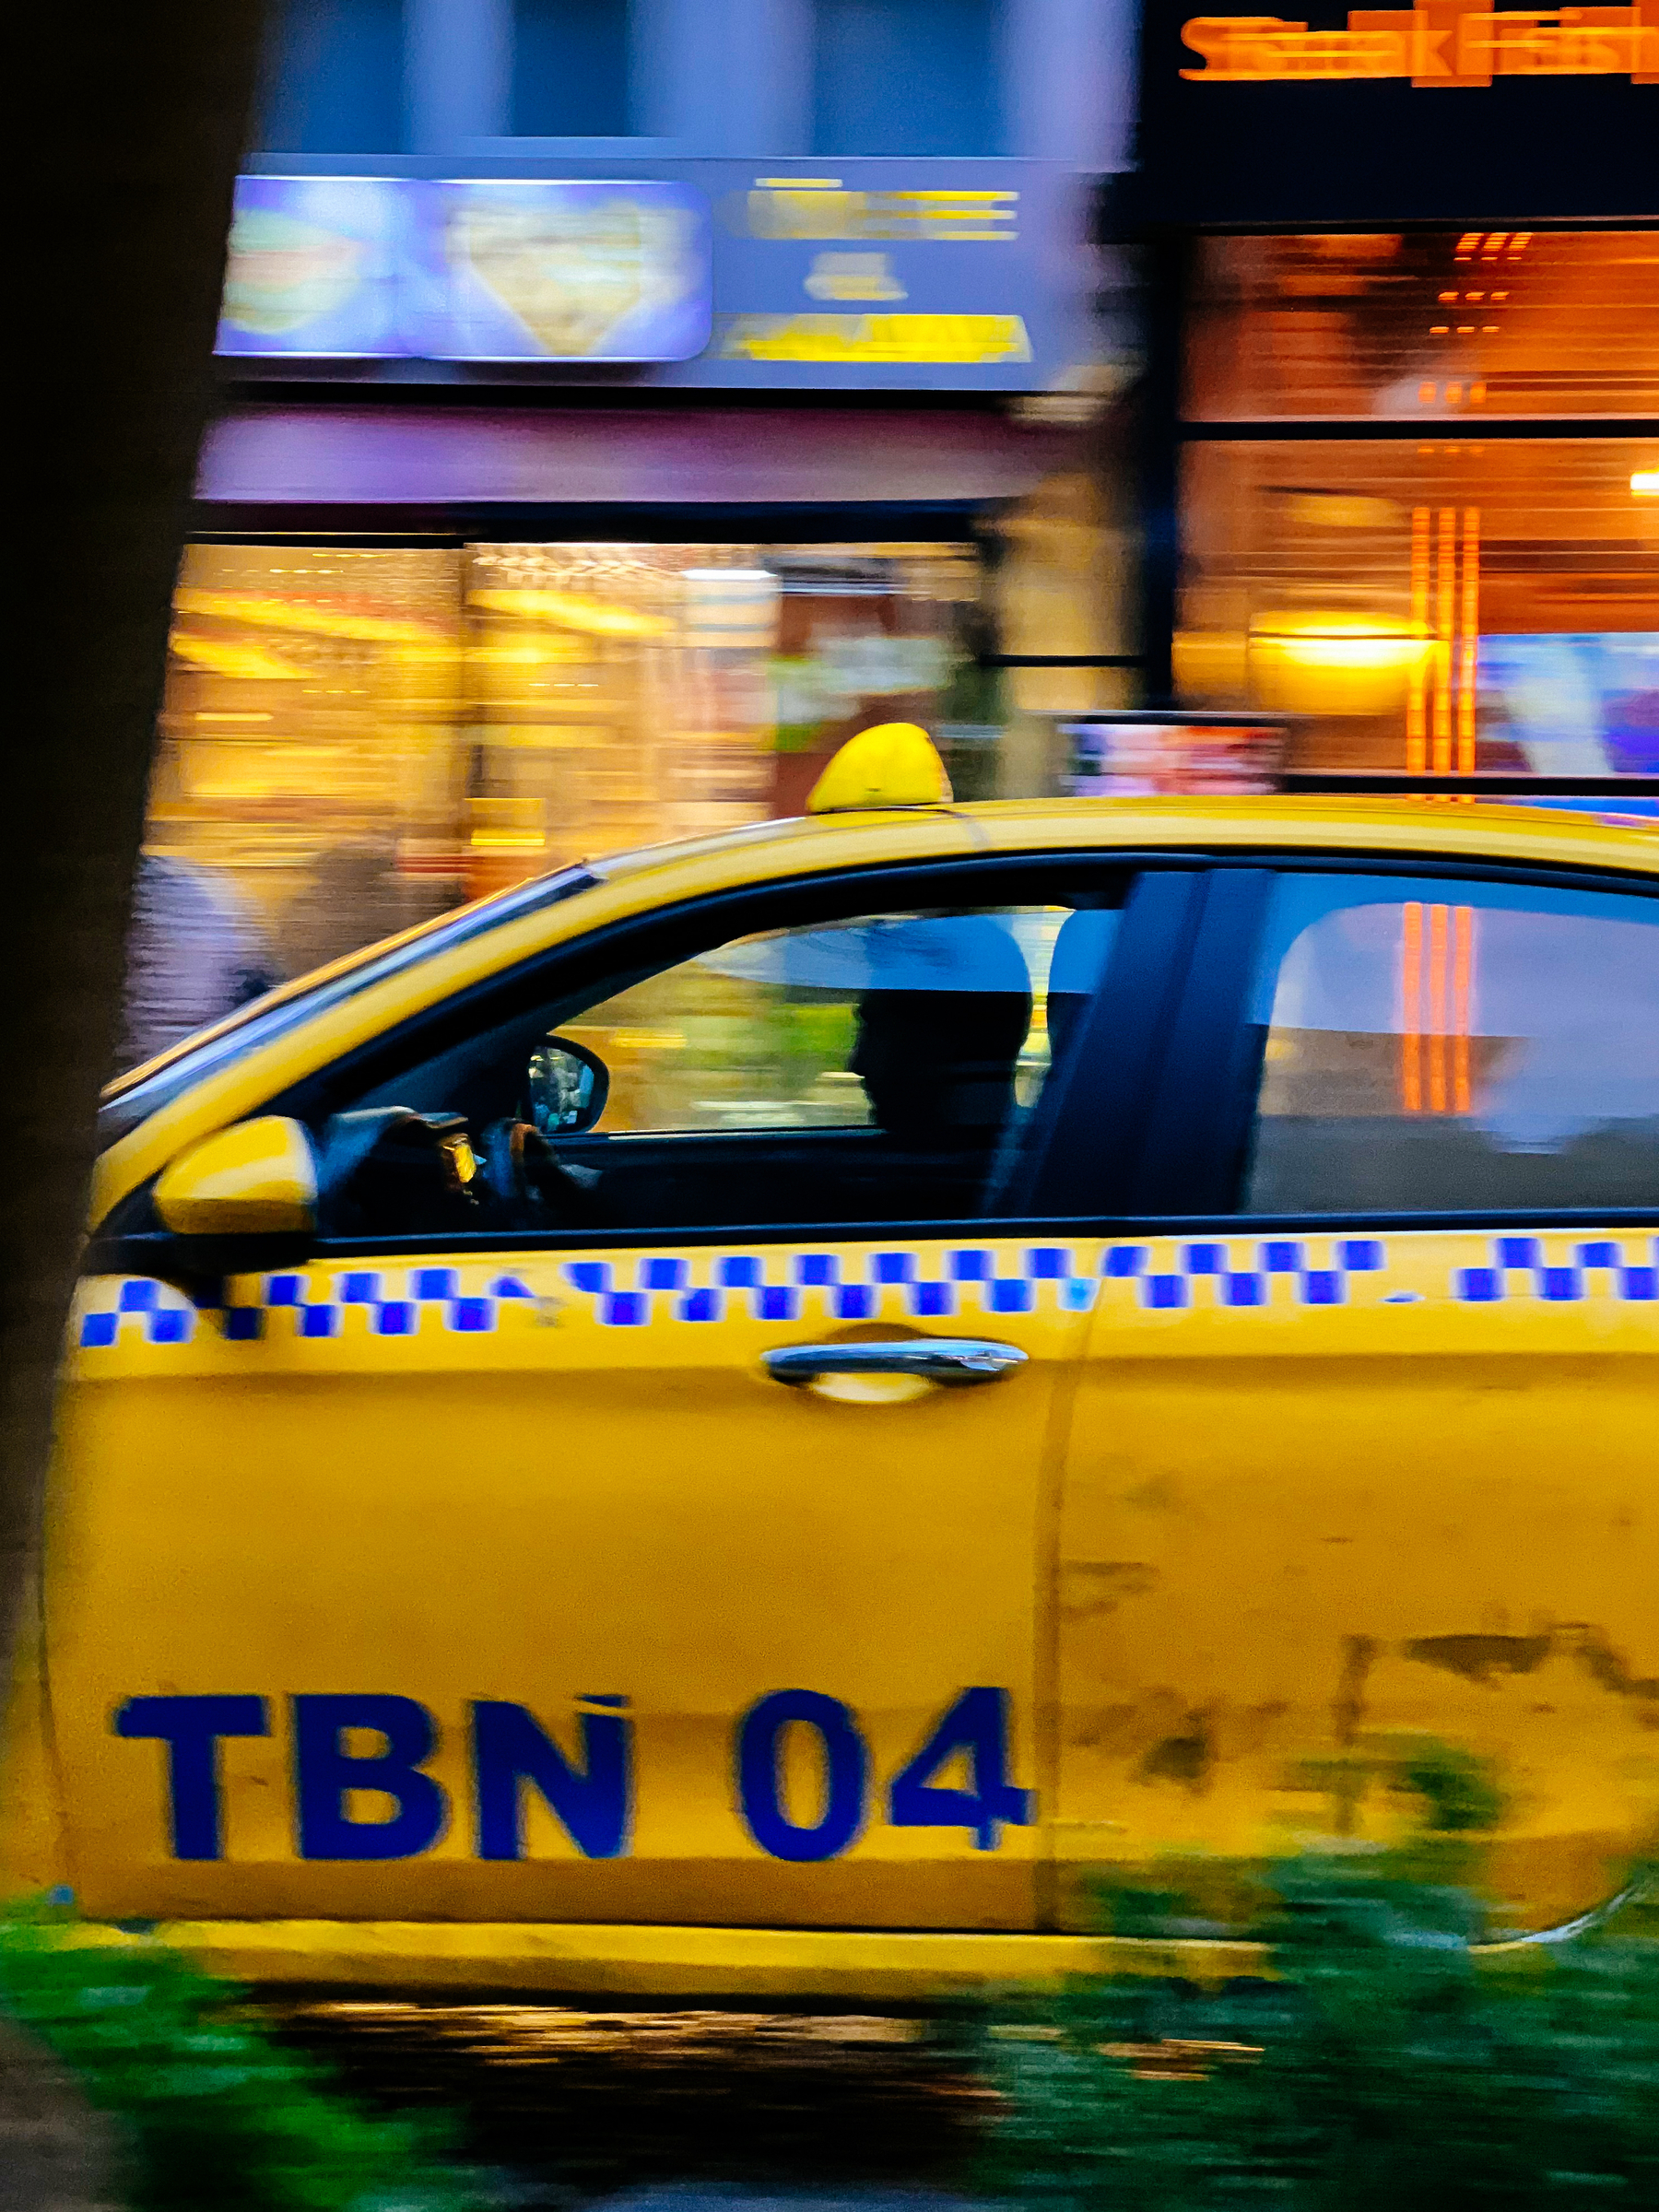 A yellow taxi drives by.